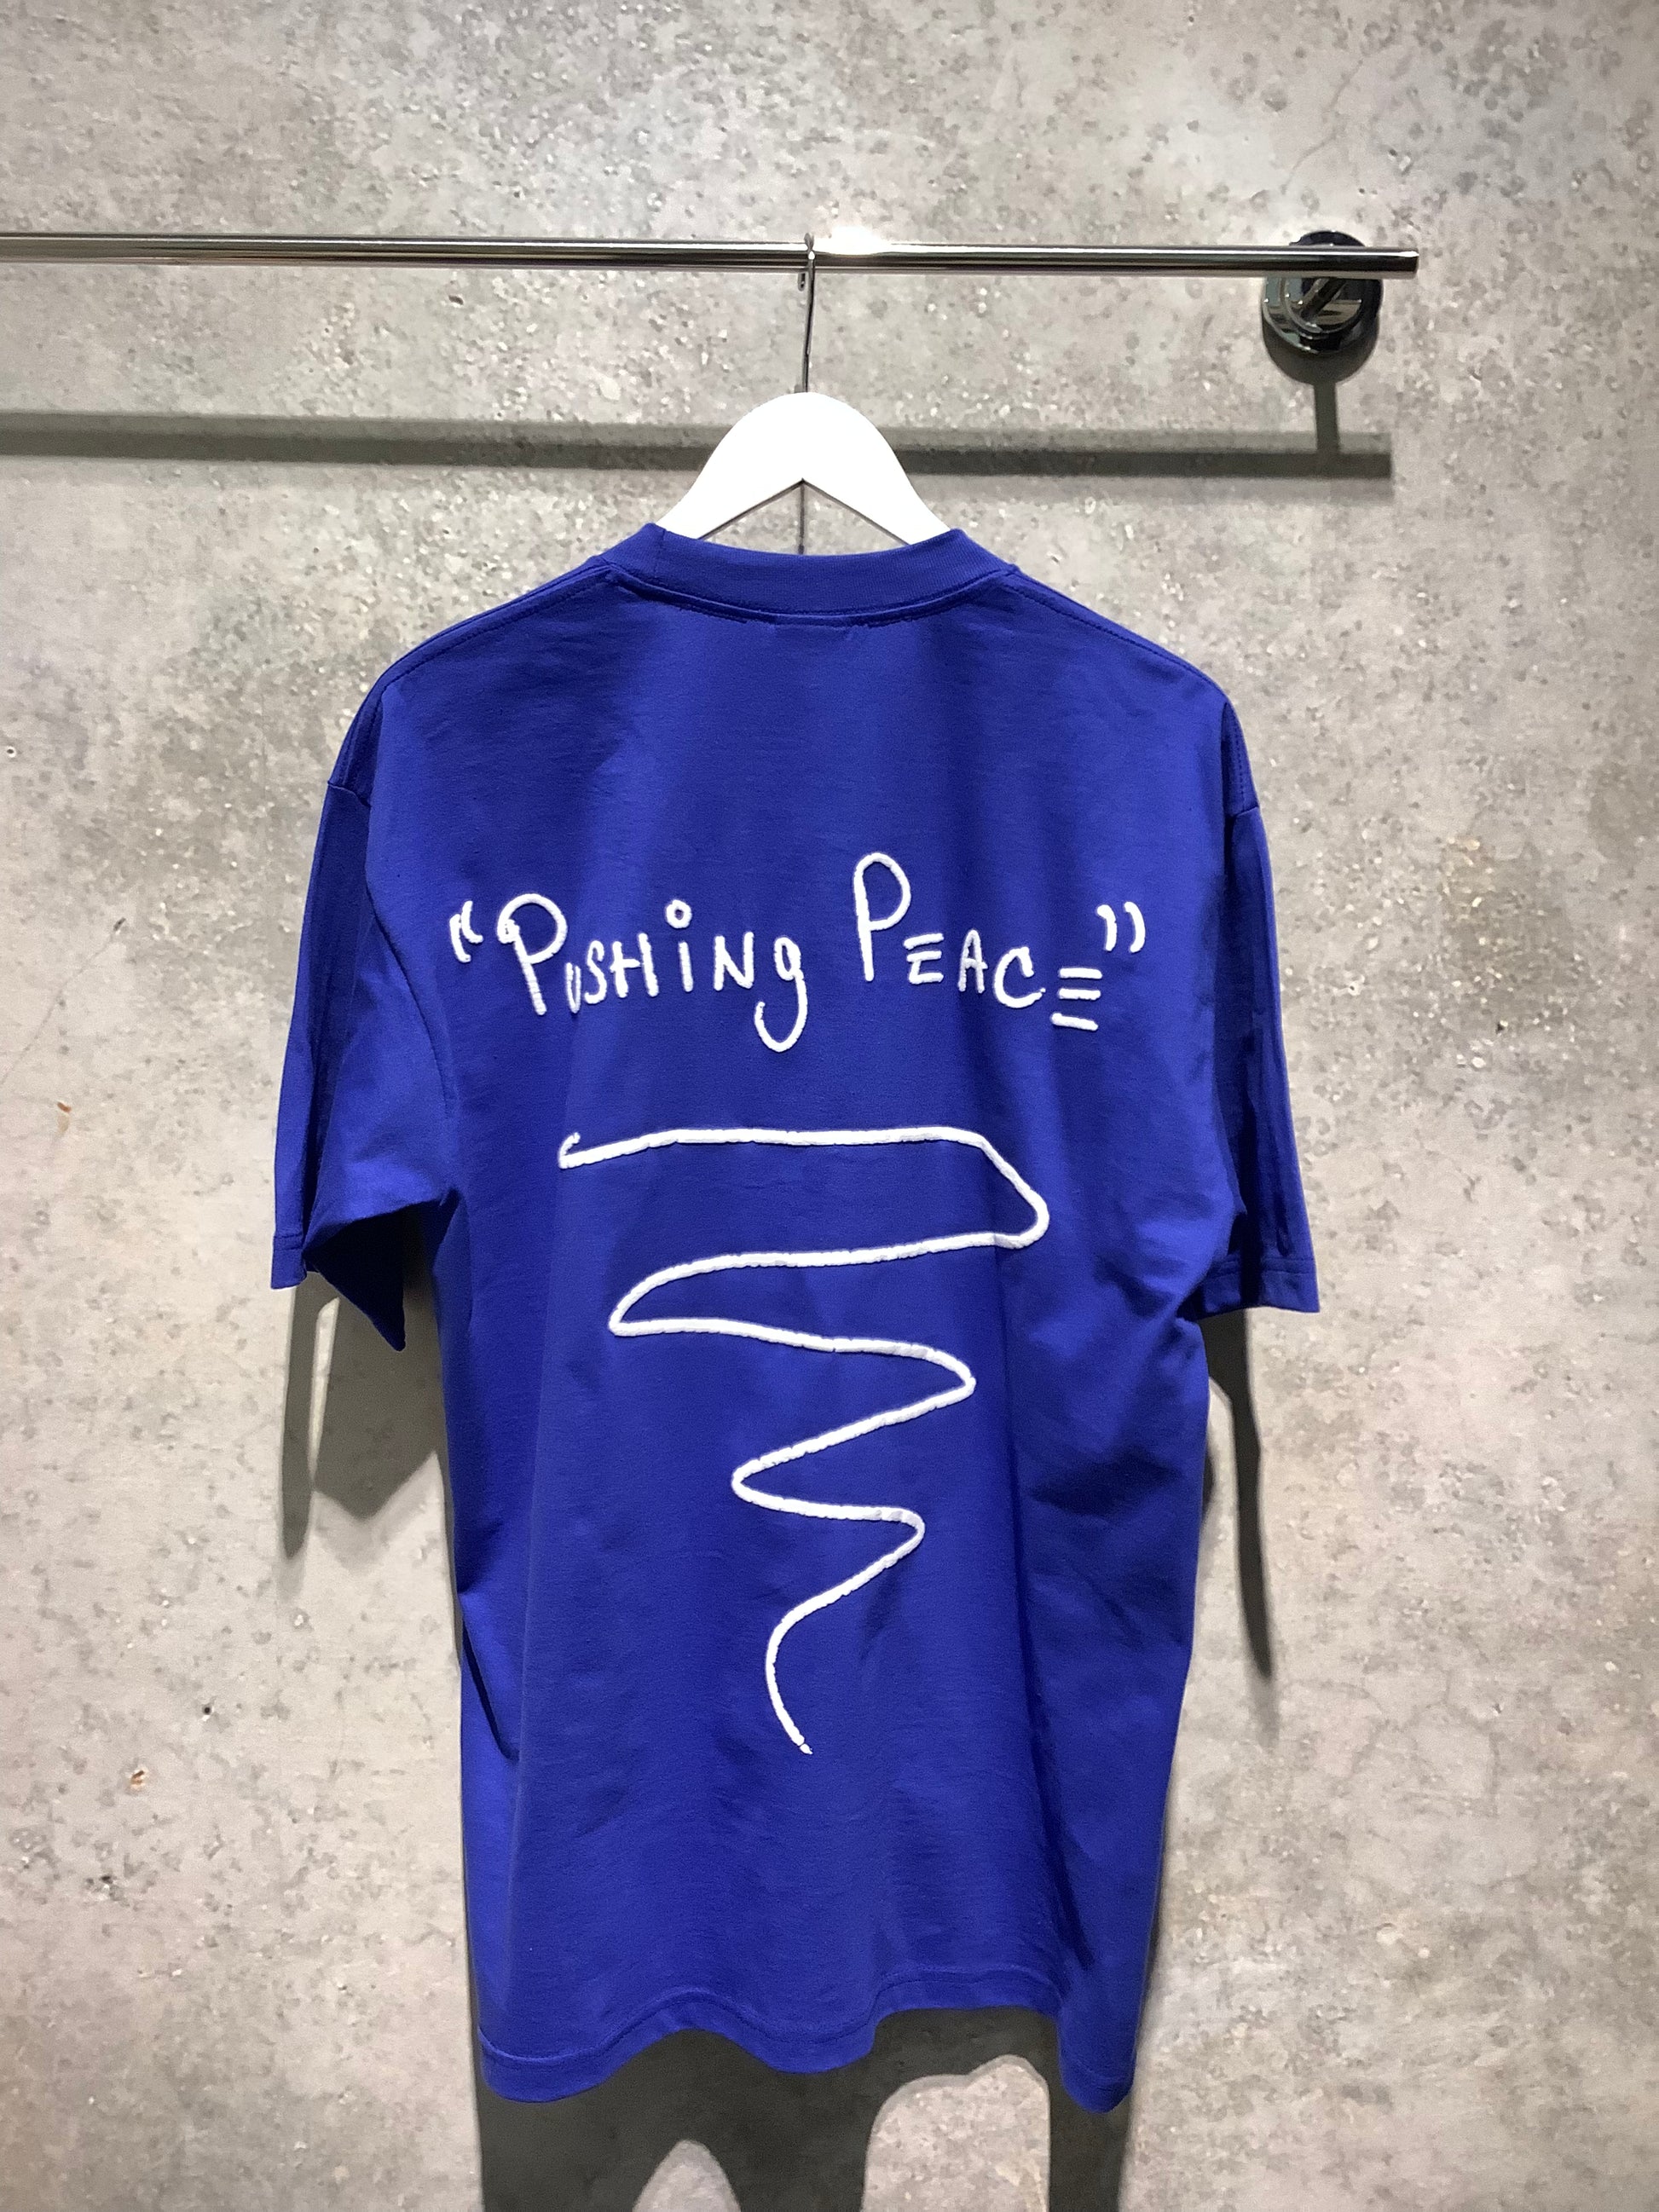 CLASS DISMISSED: PUSHING PEACE T-SHIRT ROYAL BLUE (back view)